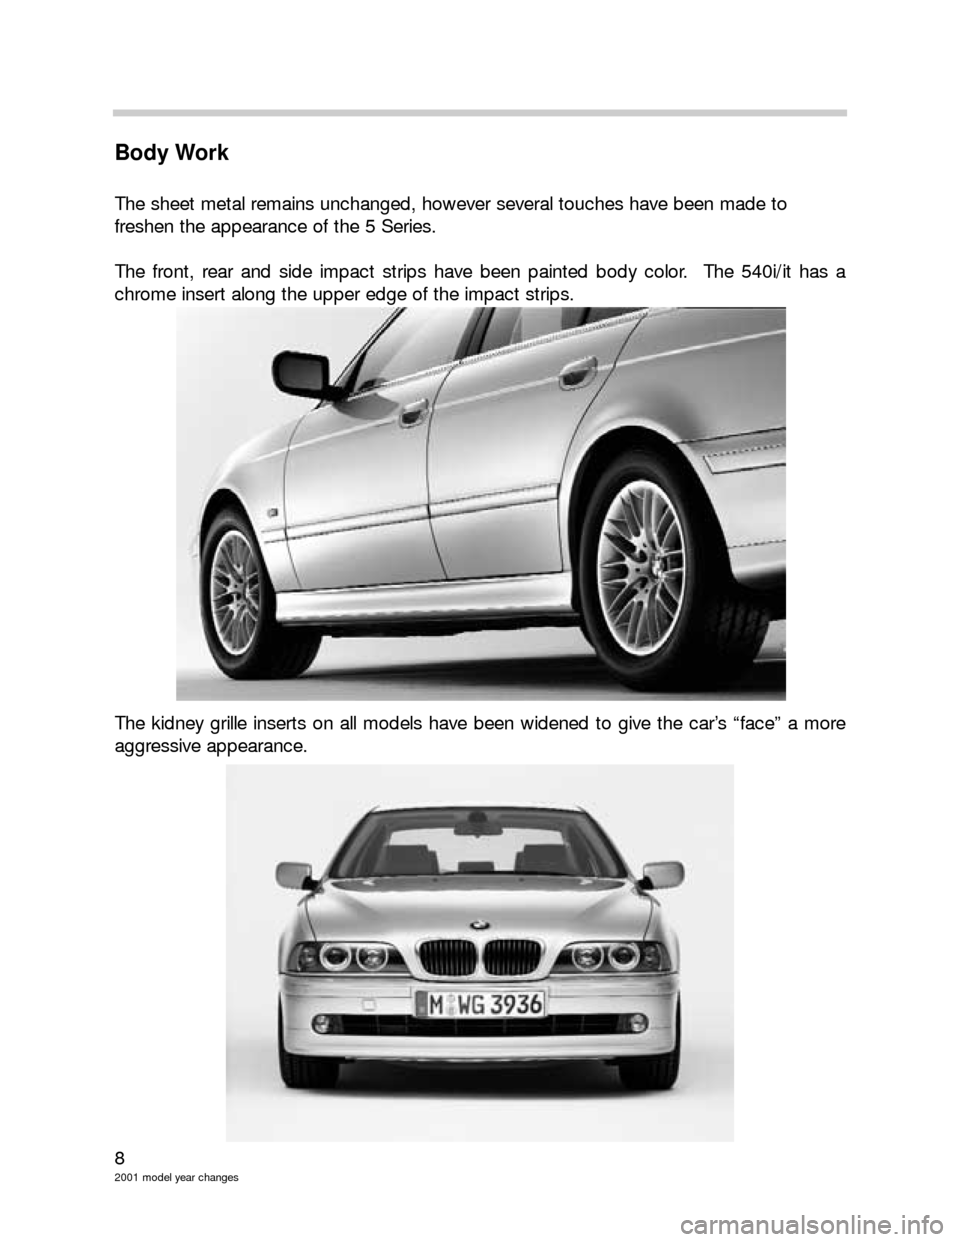 BMW 5 SERIES 2001 E39 Model Yar Changes 8
2001 model year changes
Body Work
The sheet metal remains unchanged, however several touches have been made to 
freshen the appearance of the 5 Series.
The front, rear and side impact strips have be